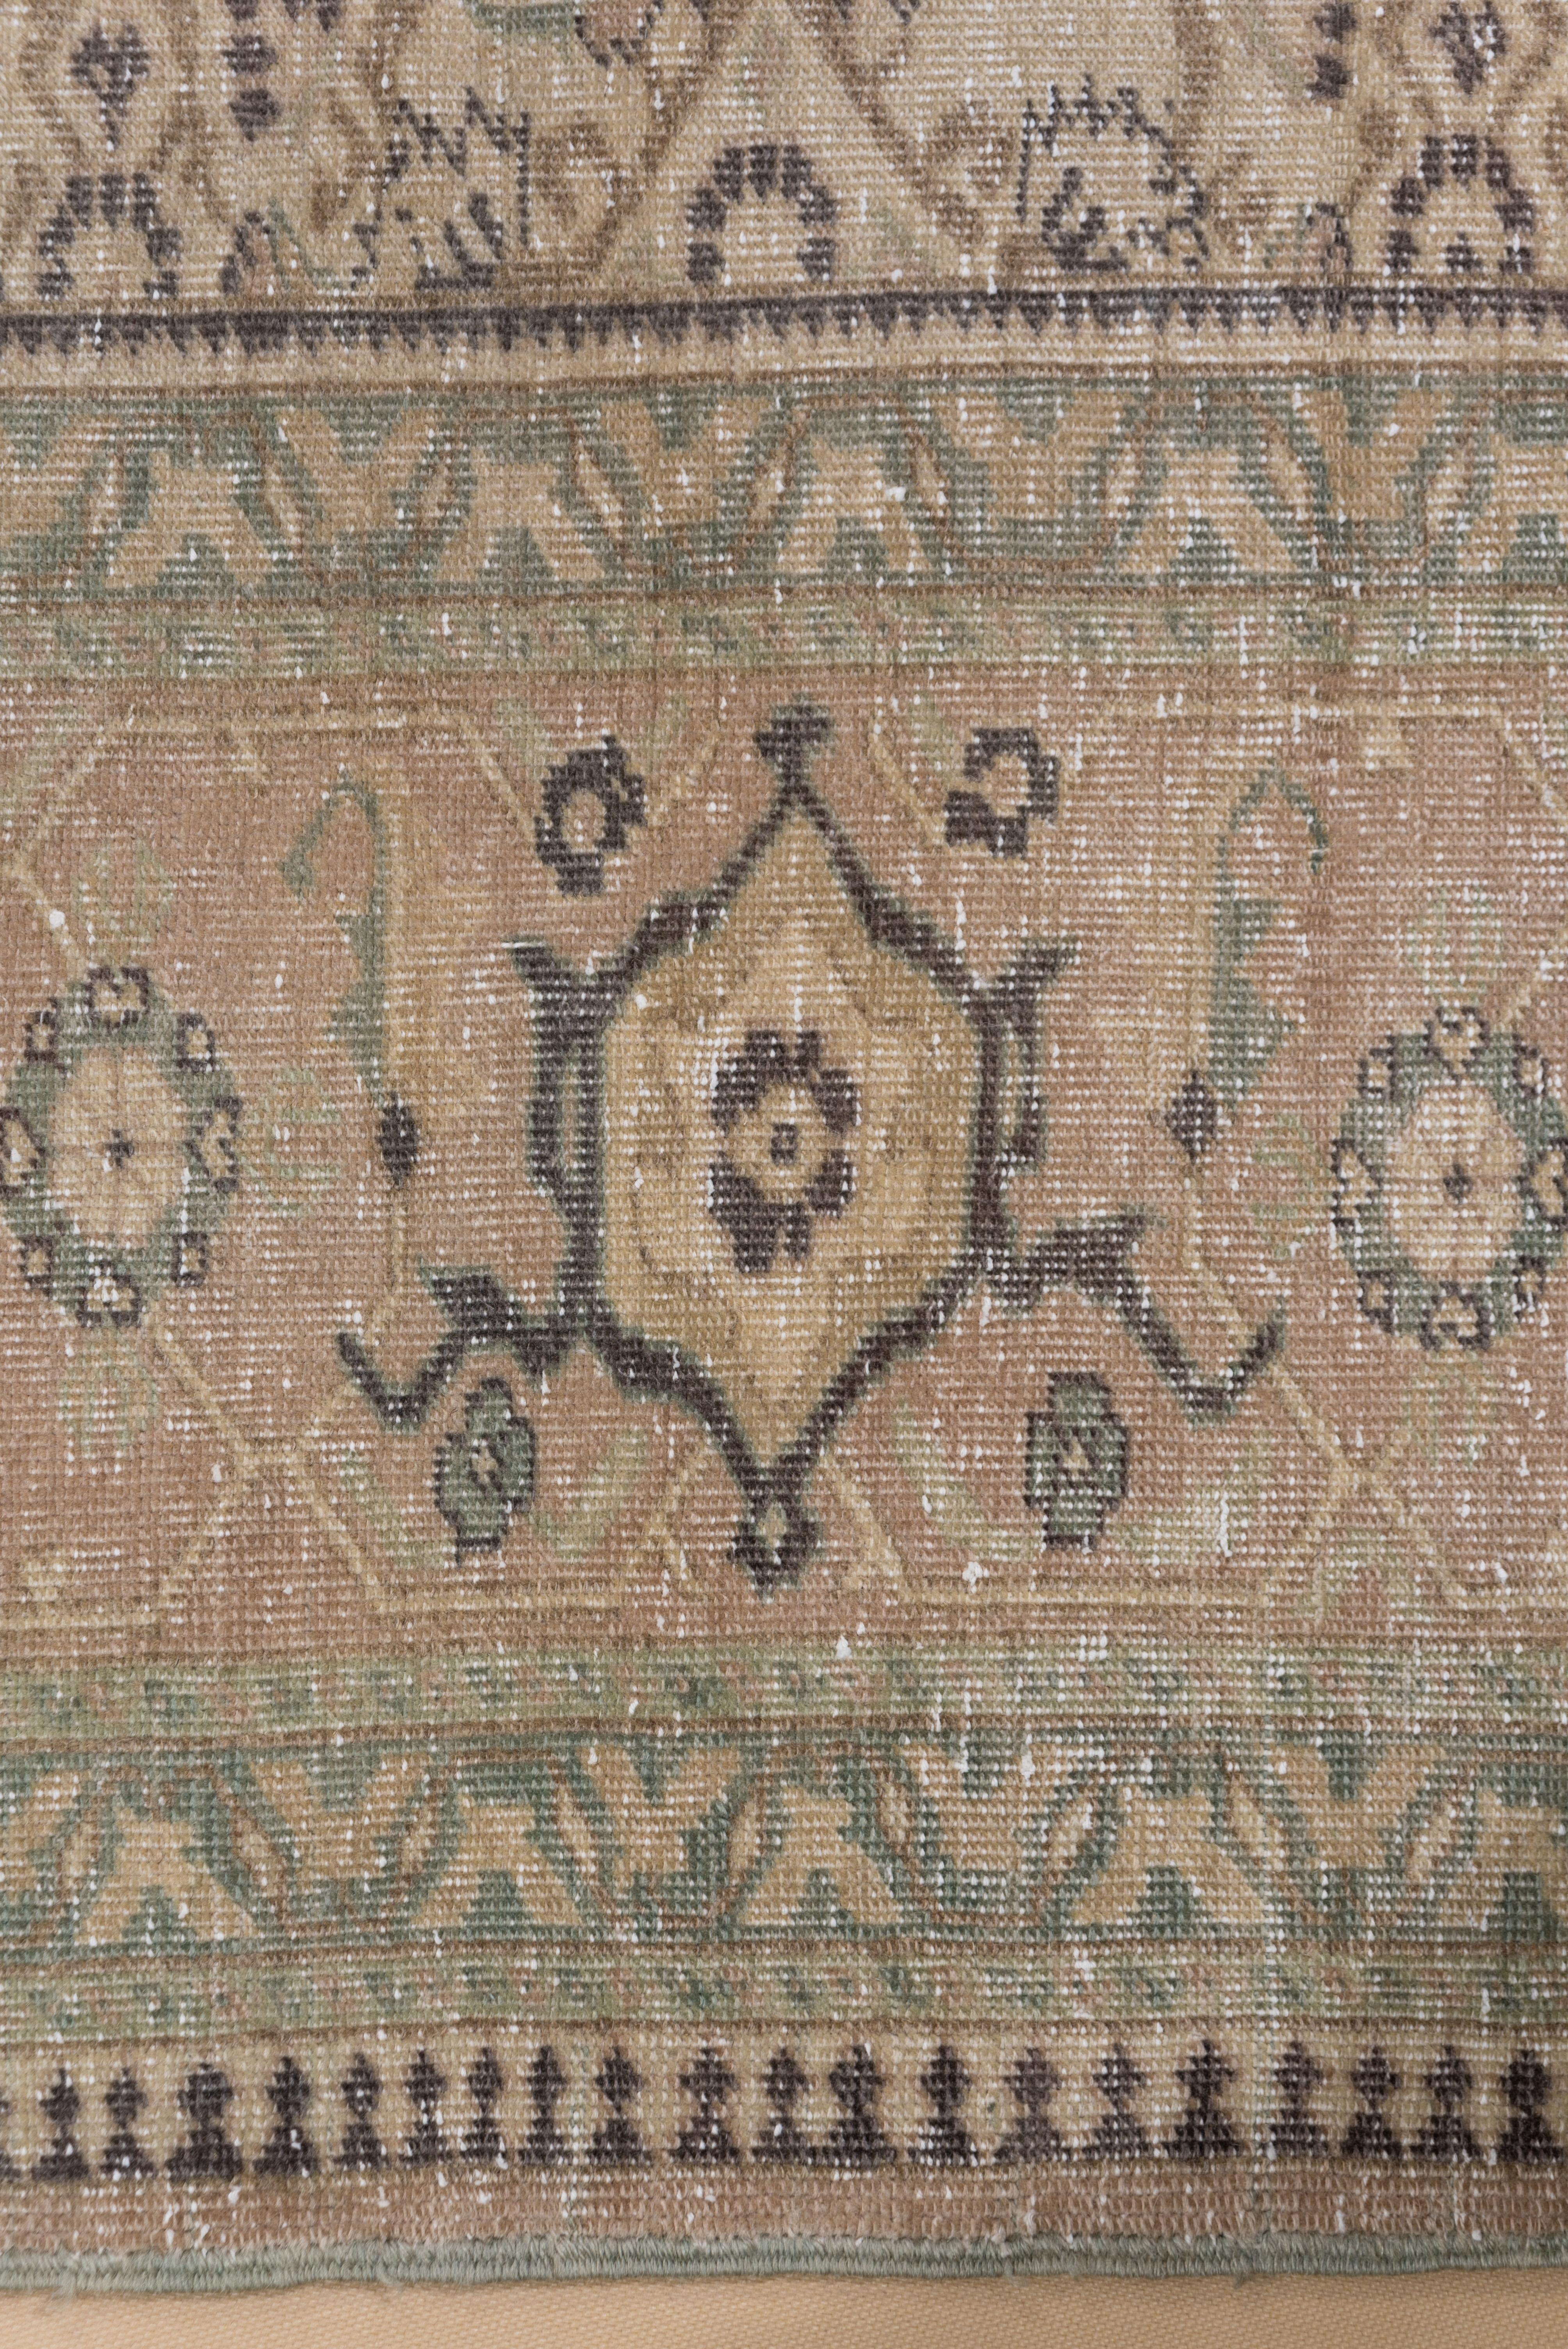 This Turkish Tabriz style Sivas carpet shows a perfectly executed small all-over Herati pattern on an eggshell ground with a wine-brown accented large scal reversing turtle border on a mauve-beige ground.